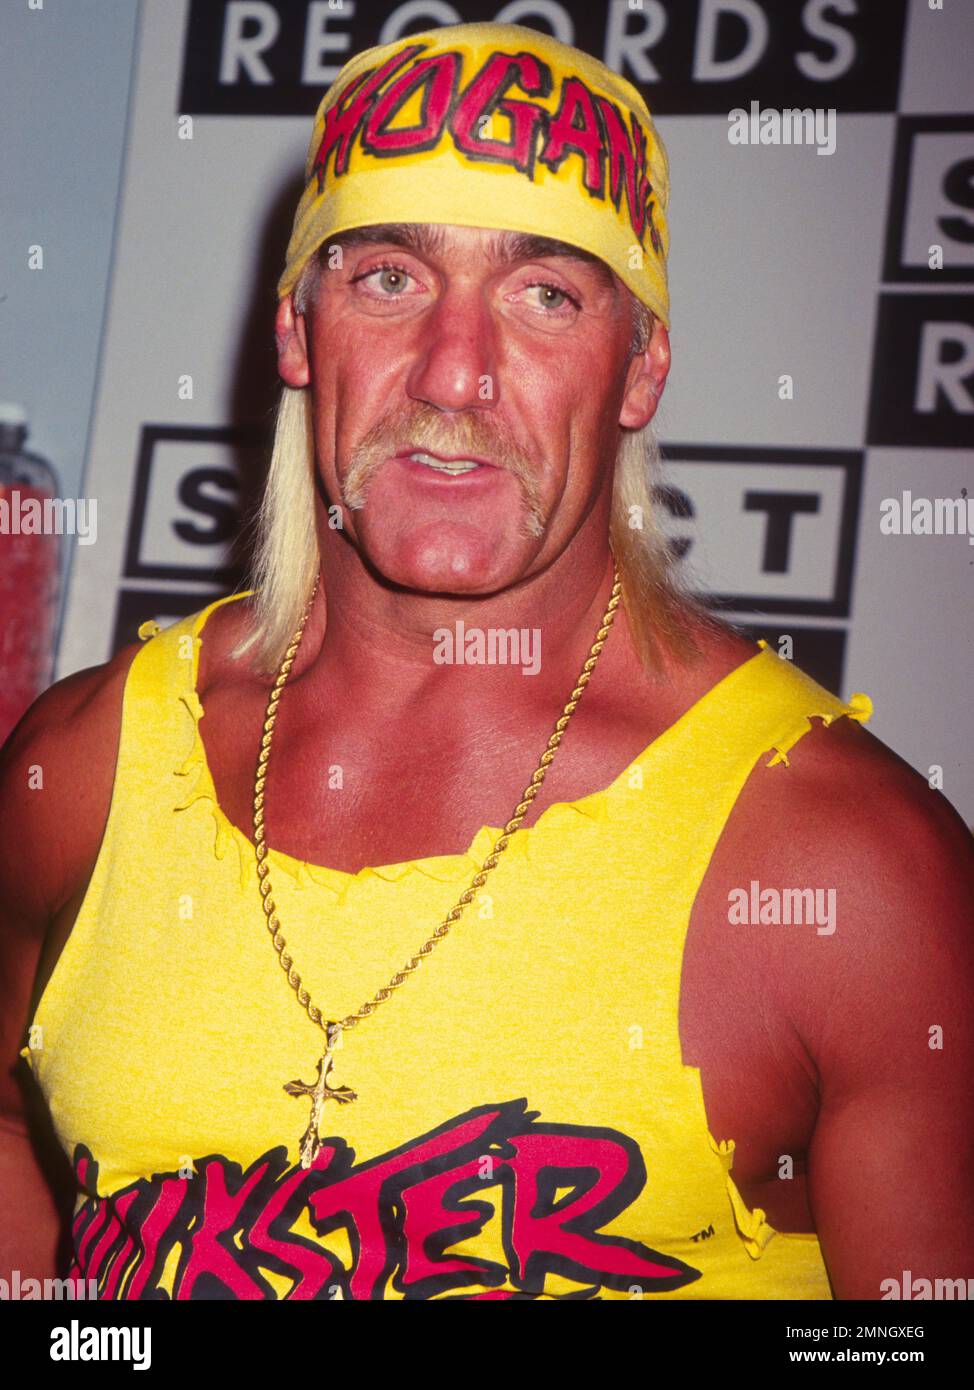 **FILE PHOTO** Hulk Hogan Reportedly Can't Feel Lower Body following ...